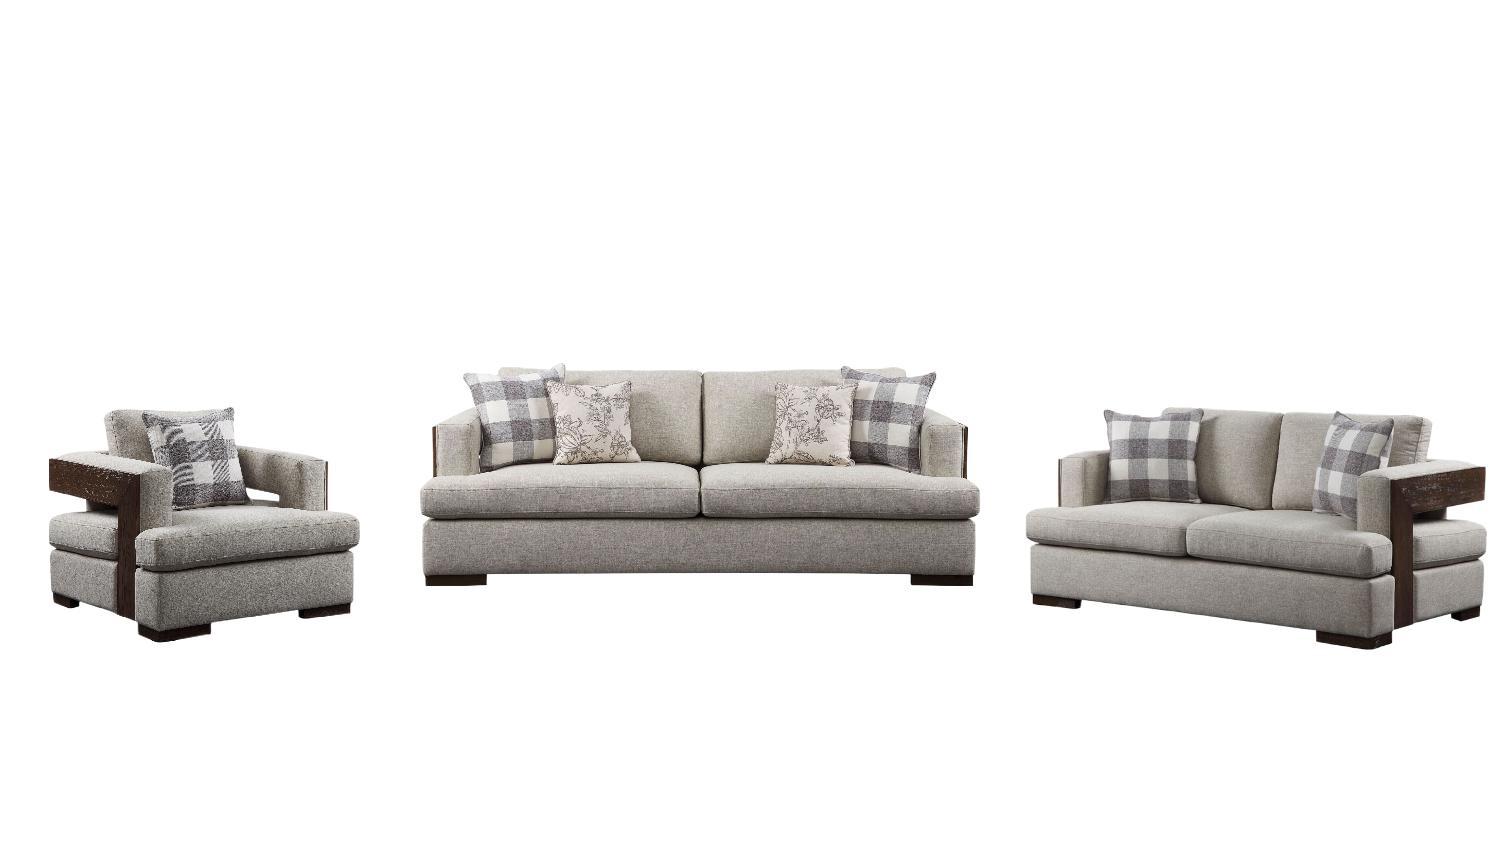 Transitional Sofa Loveseat and Chair Set Niamey 54850-3pcs in Beige Fabric